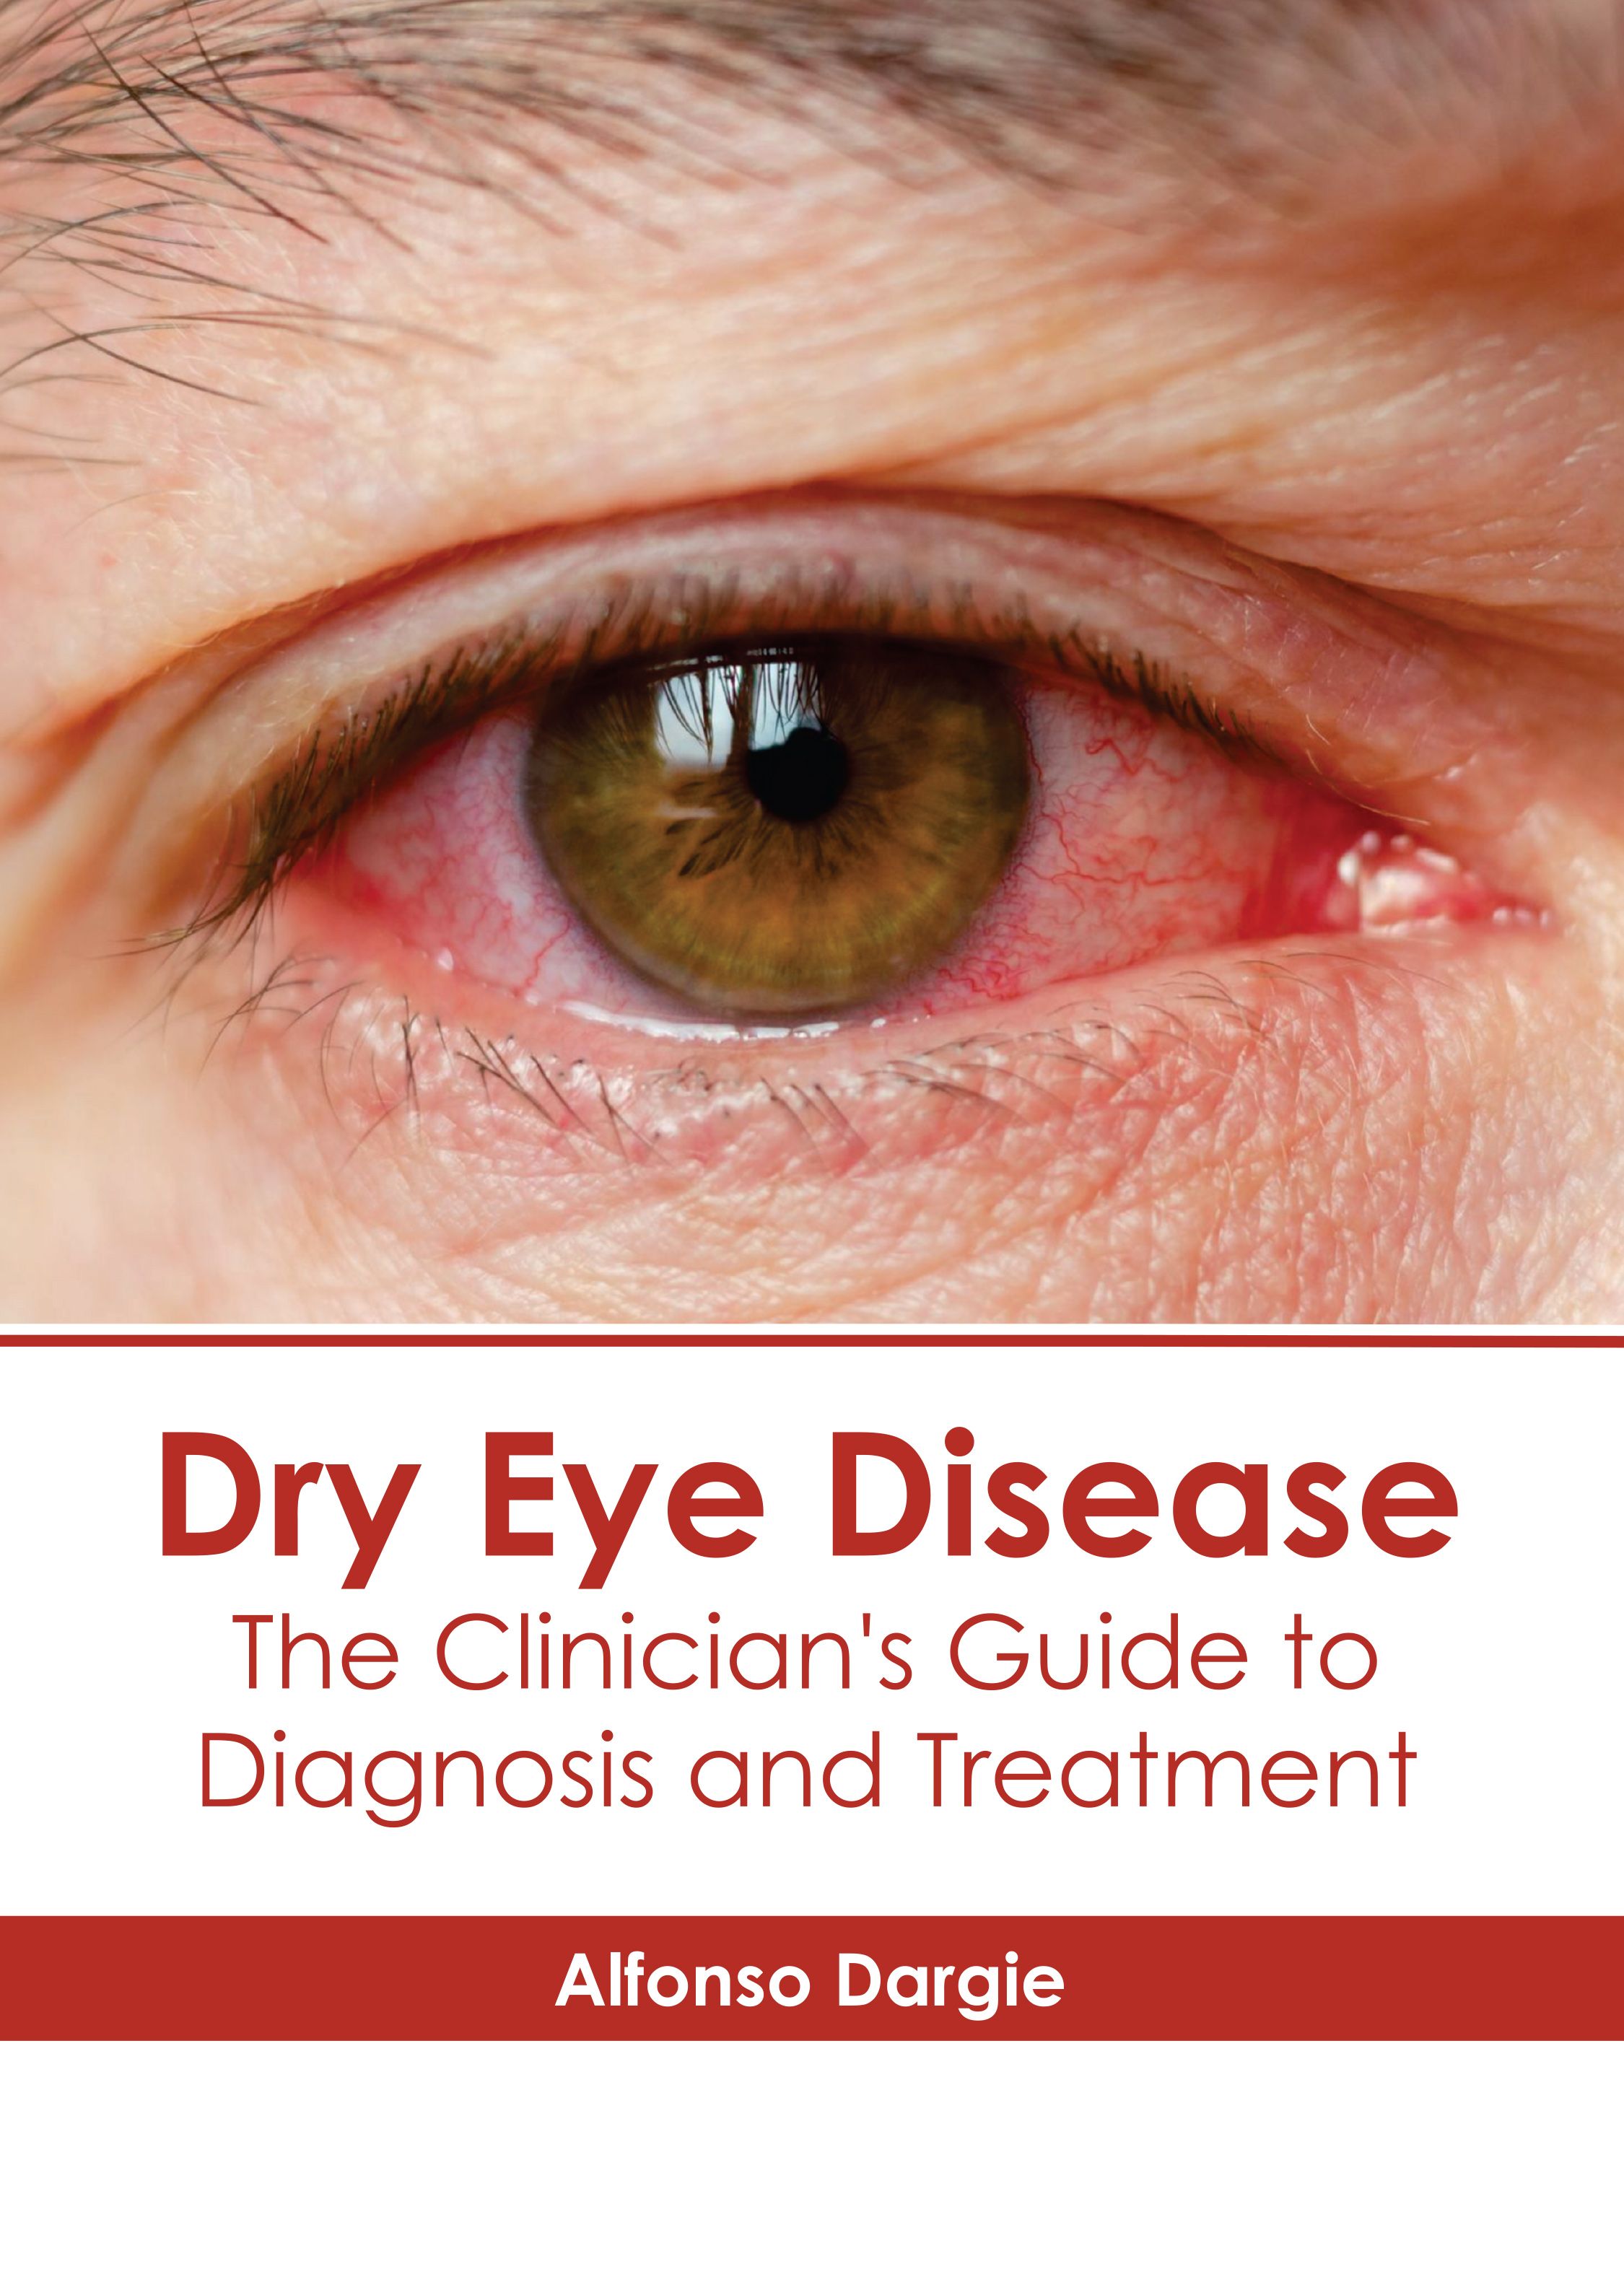 

exclusive-publishers/american-medical-publishers/dry-eye-disease-the-clinician-s-guide-to-diagnosis-and-treatment-9798887400792